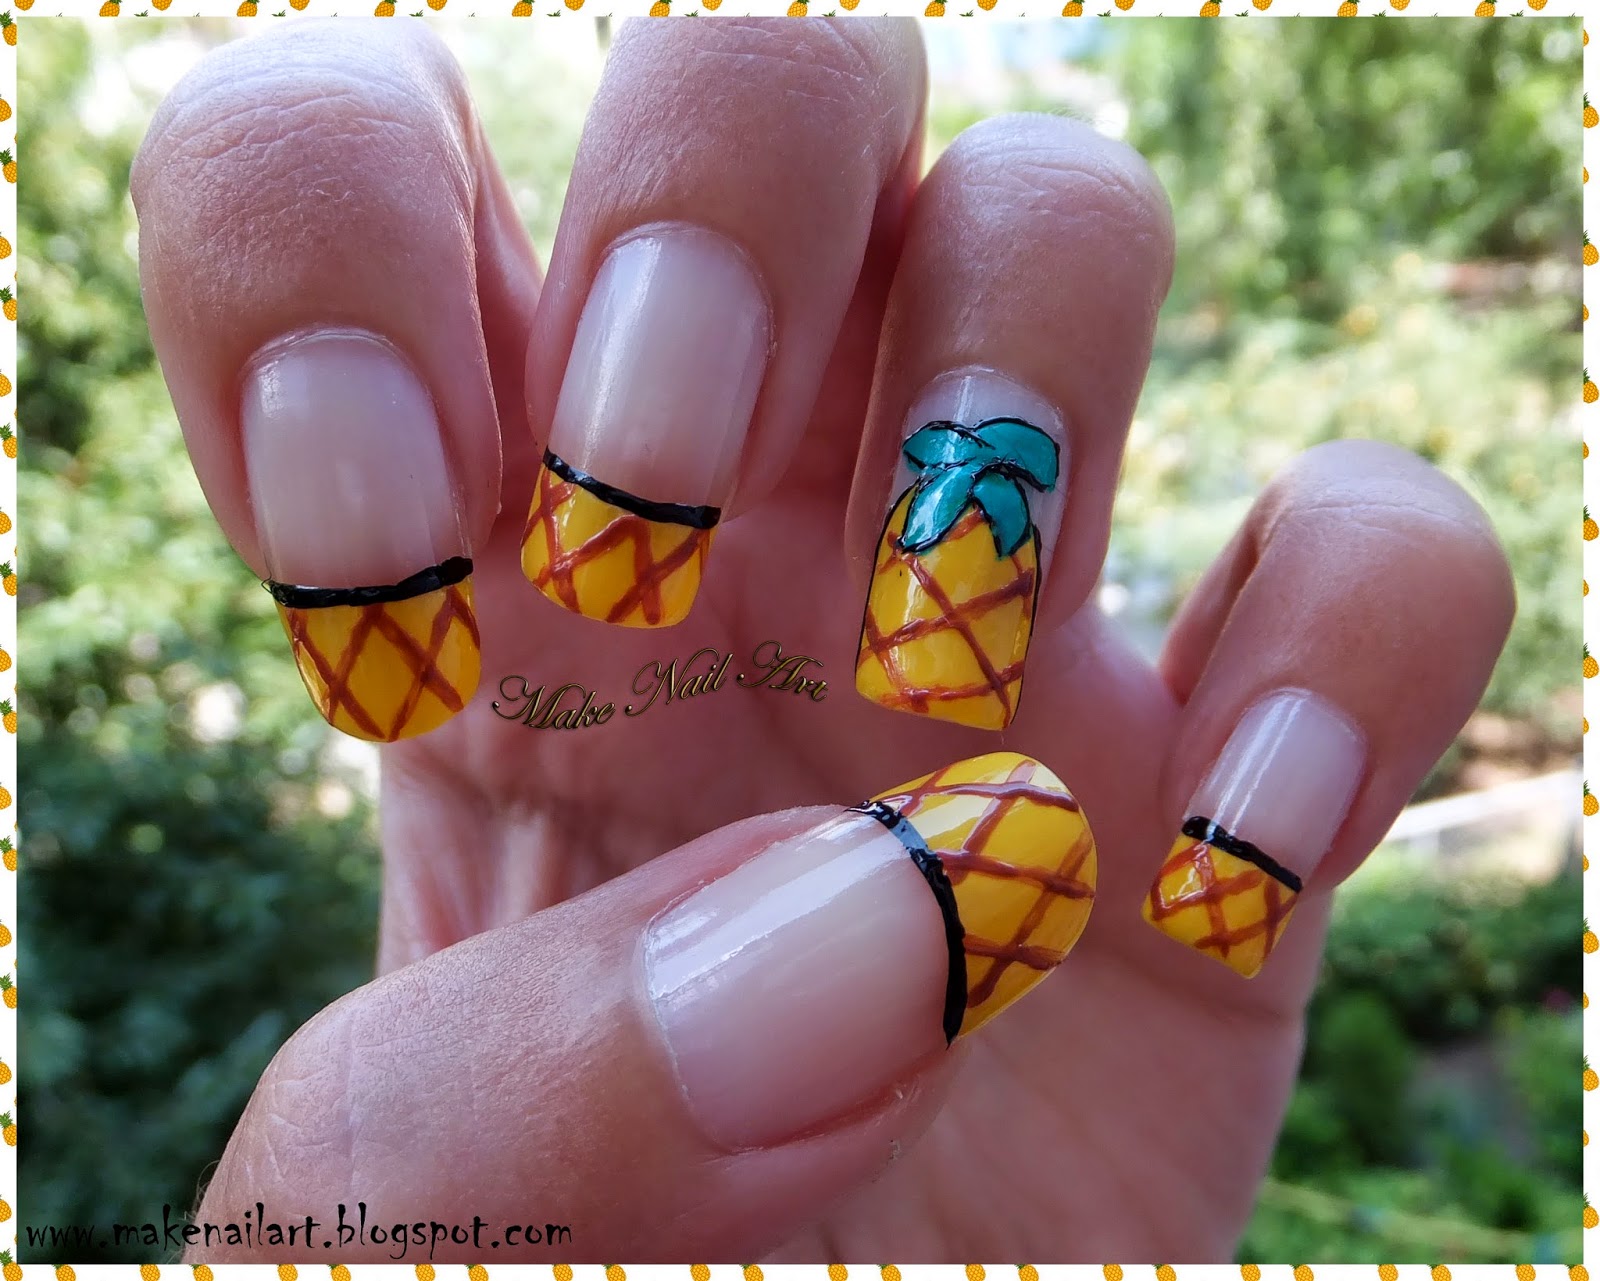 1. Pineapple Nail Art Stickers - 10 Sheets - wide 5